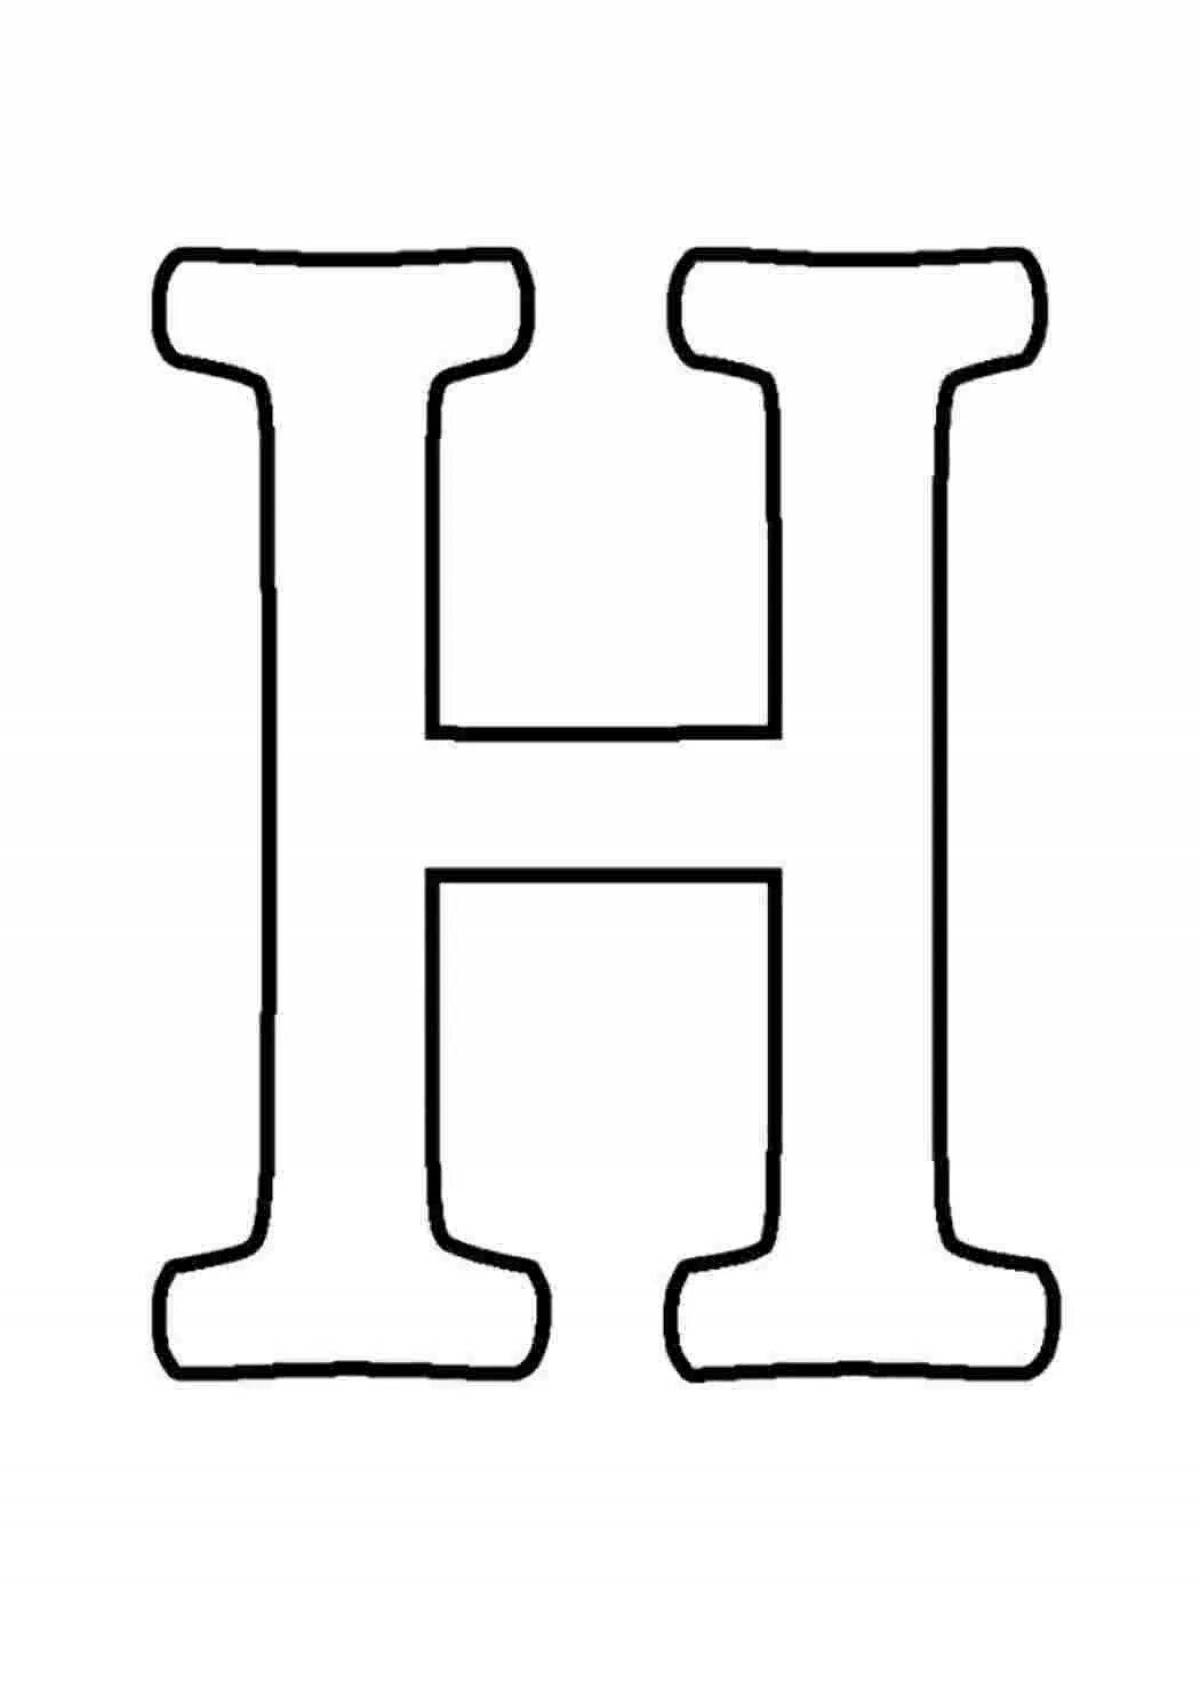 Coloring pages with letters